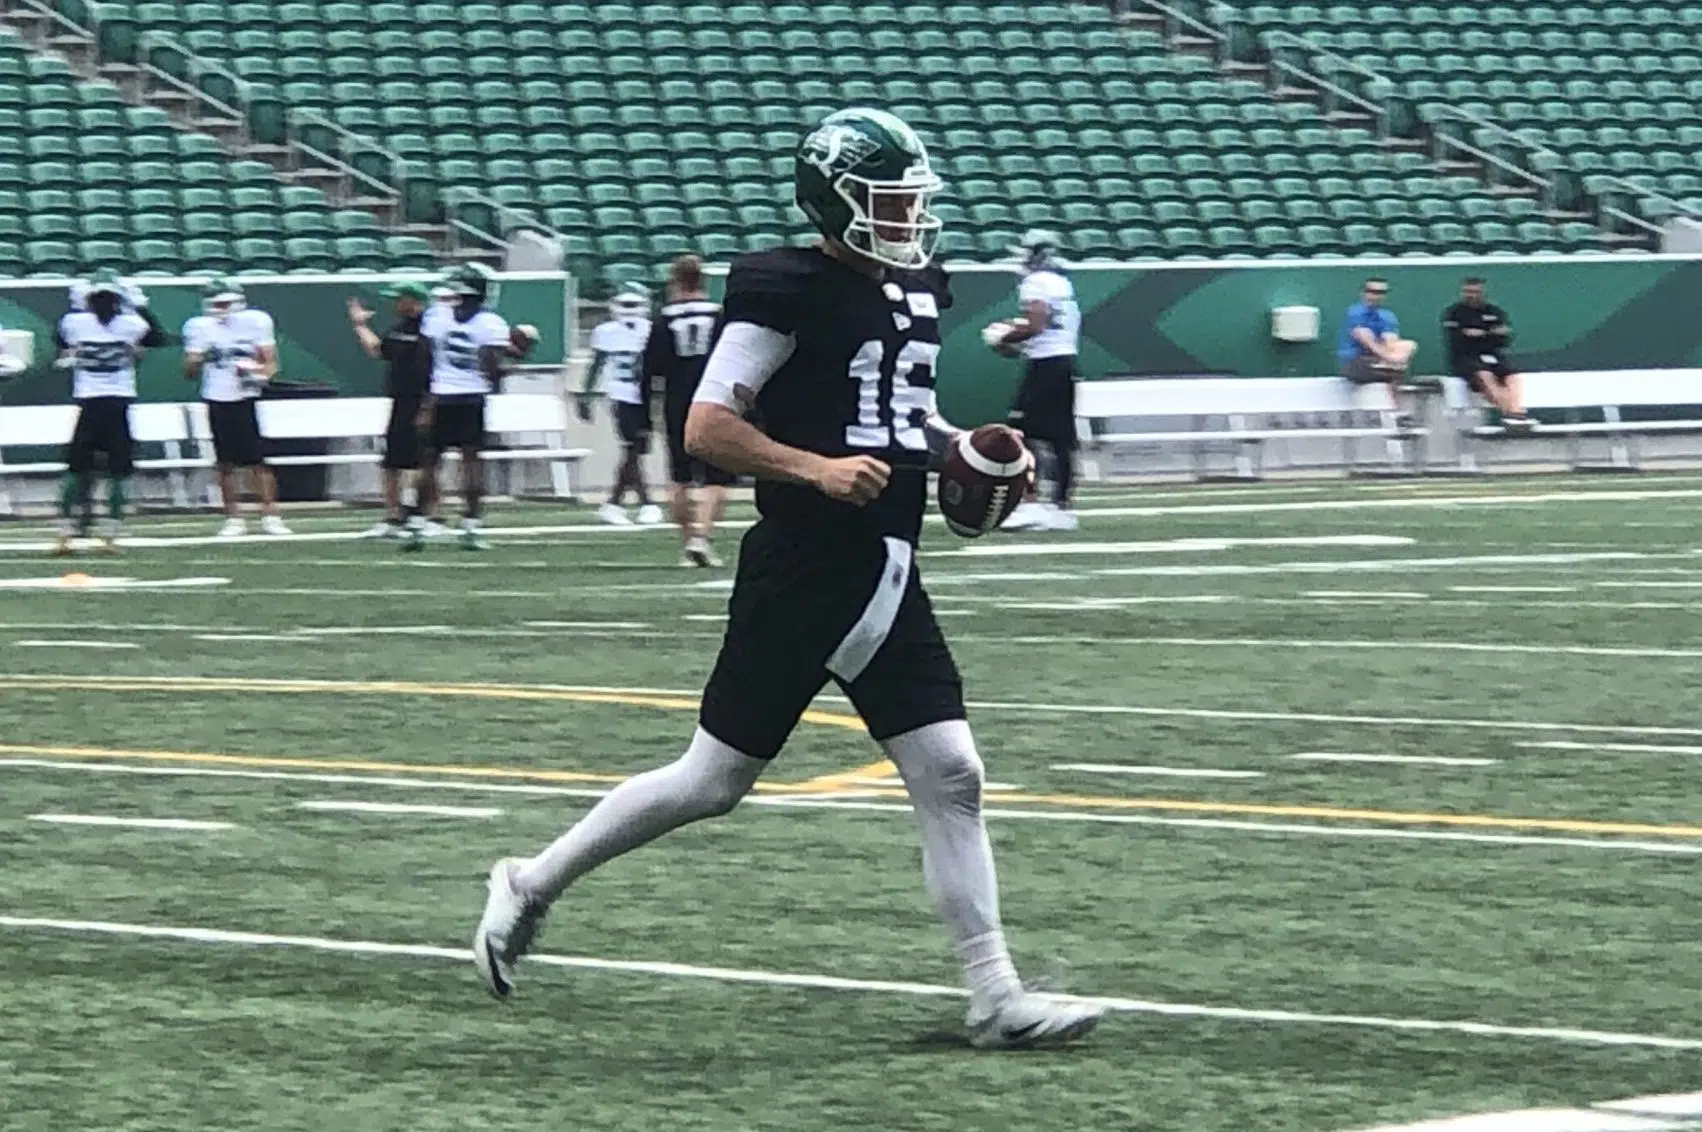 'It's been the dream': Riders hold first practice after cuts